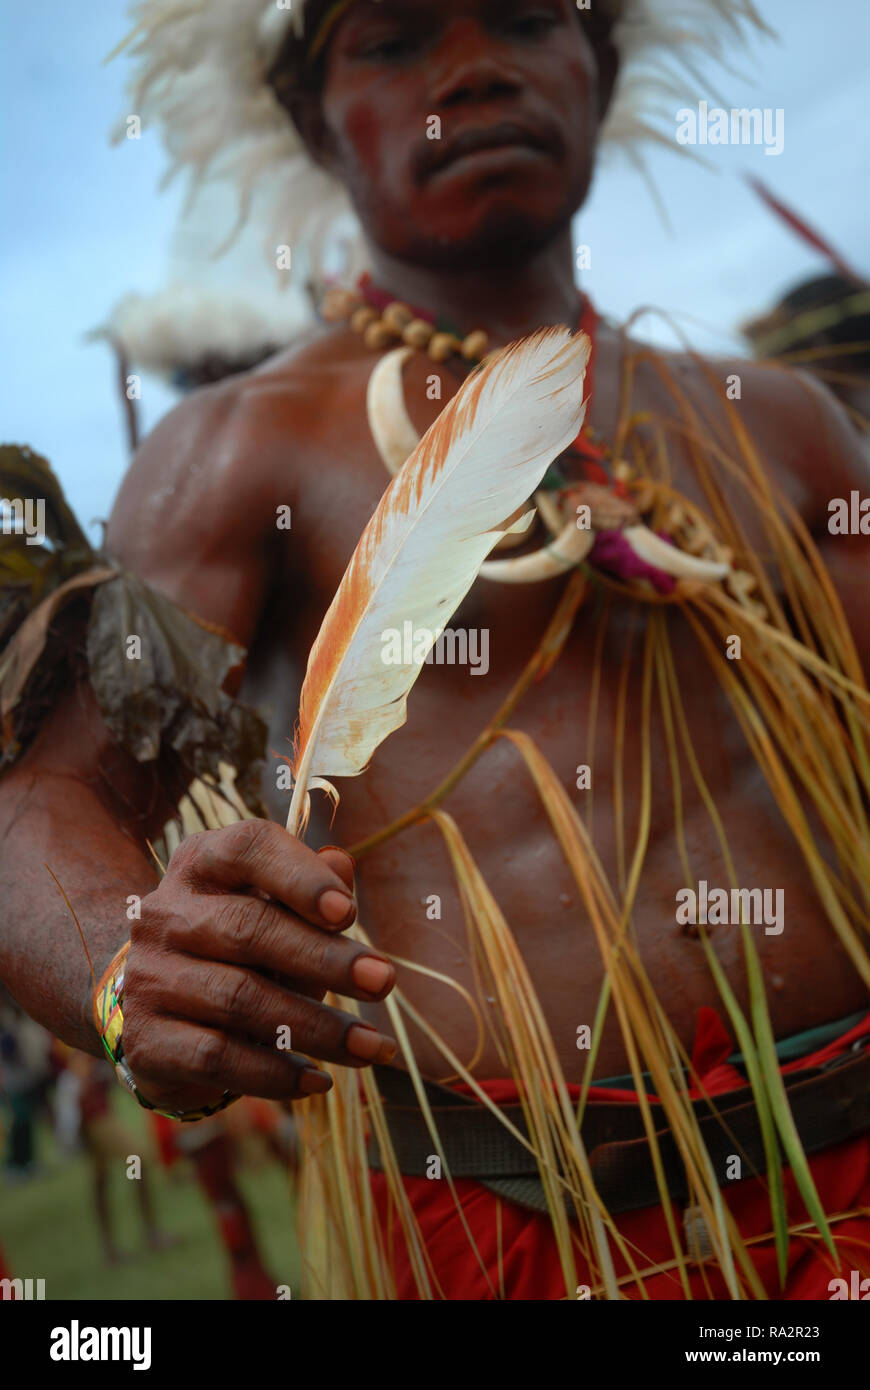 Colourfully dressed and face painted man holding a feather as part of the annual Sing Sing in Madang, Papua New Guinea. Stock Photo